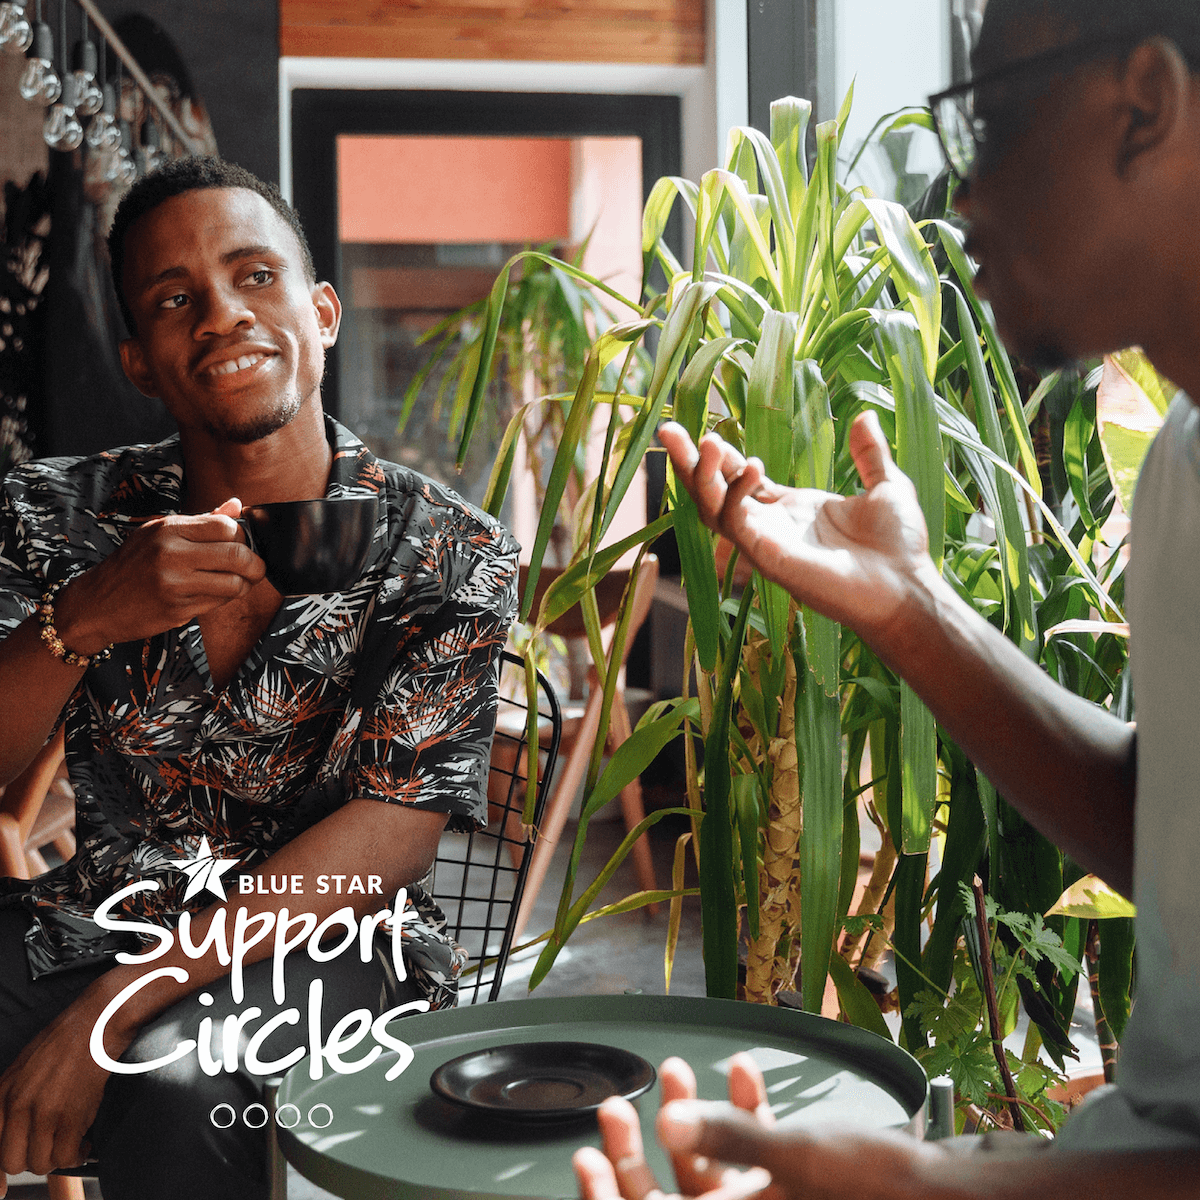 BSF_SupportCircles_1200x1200_Lifestyle2